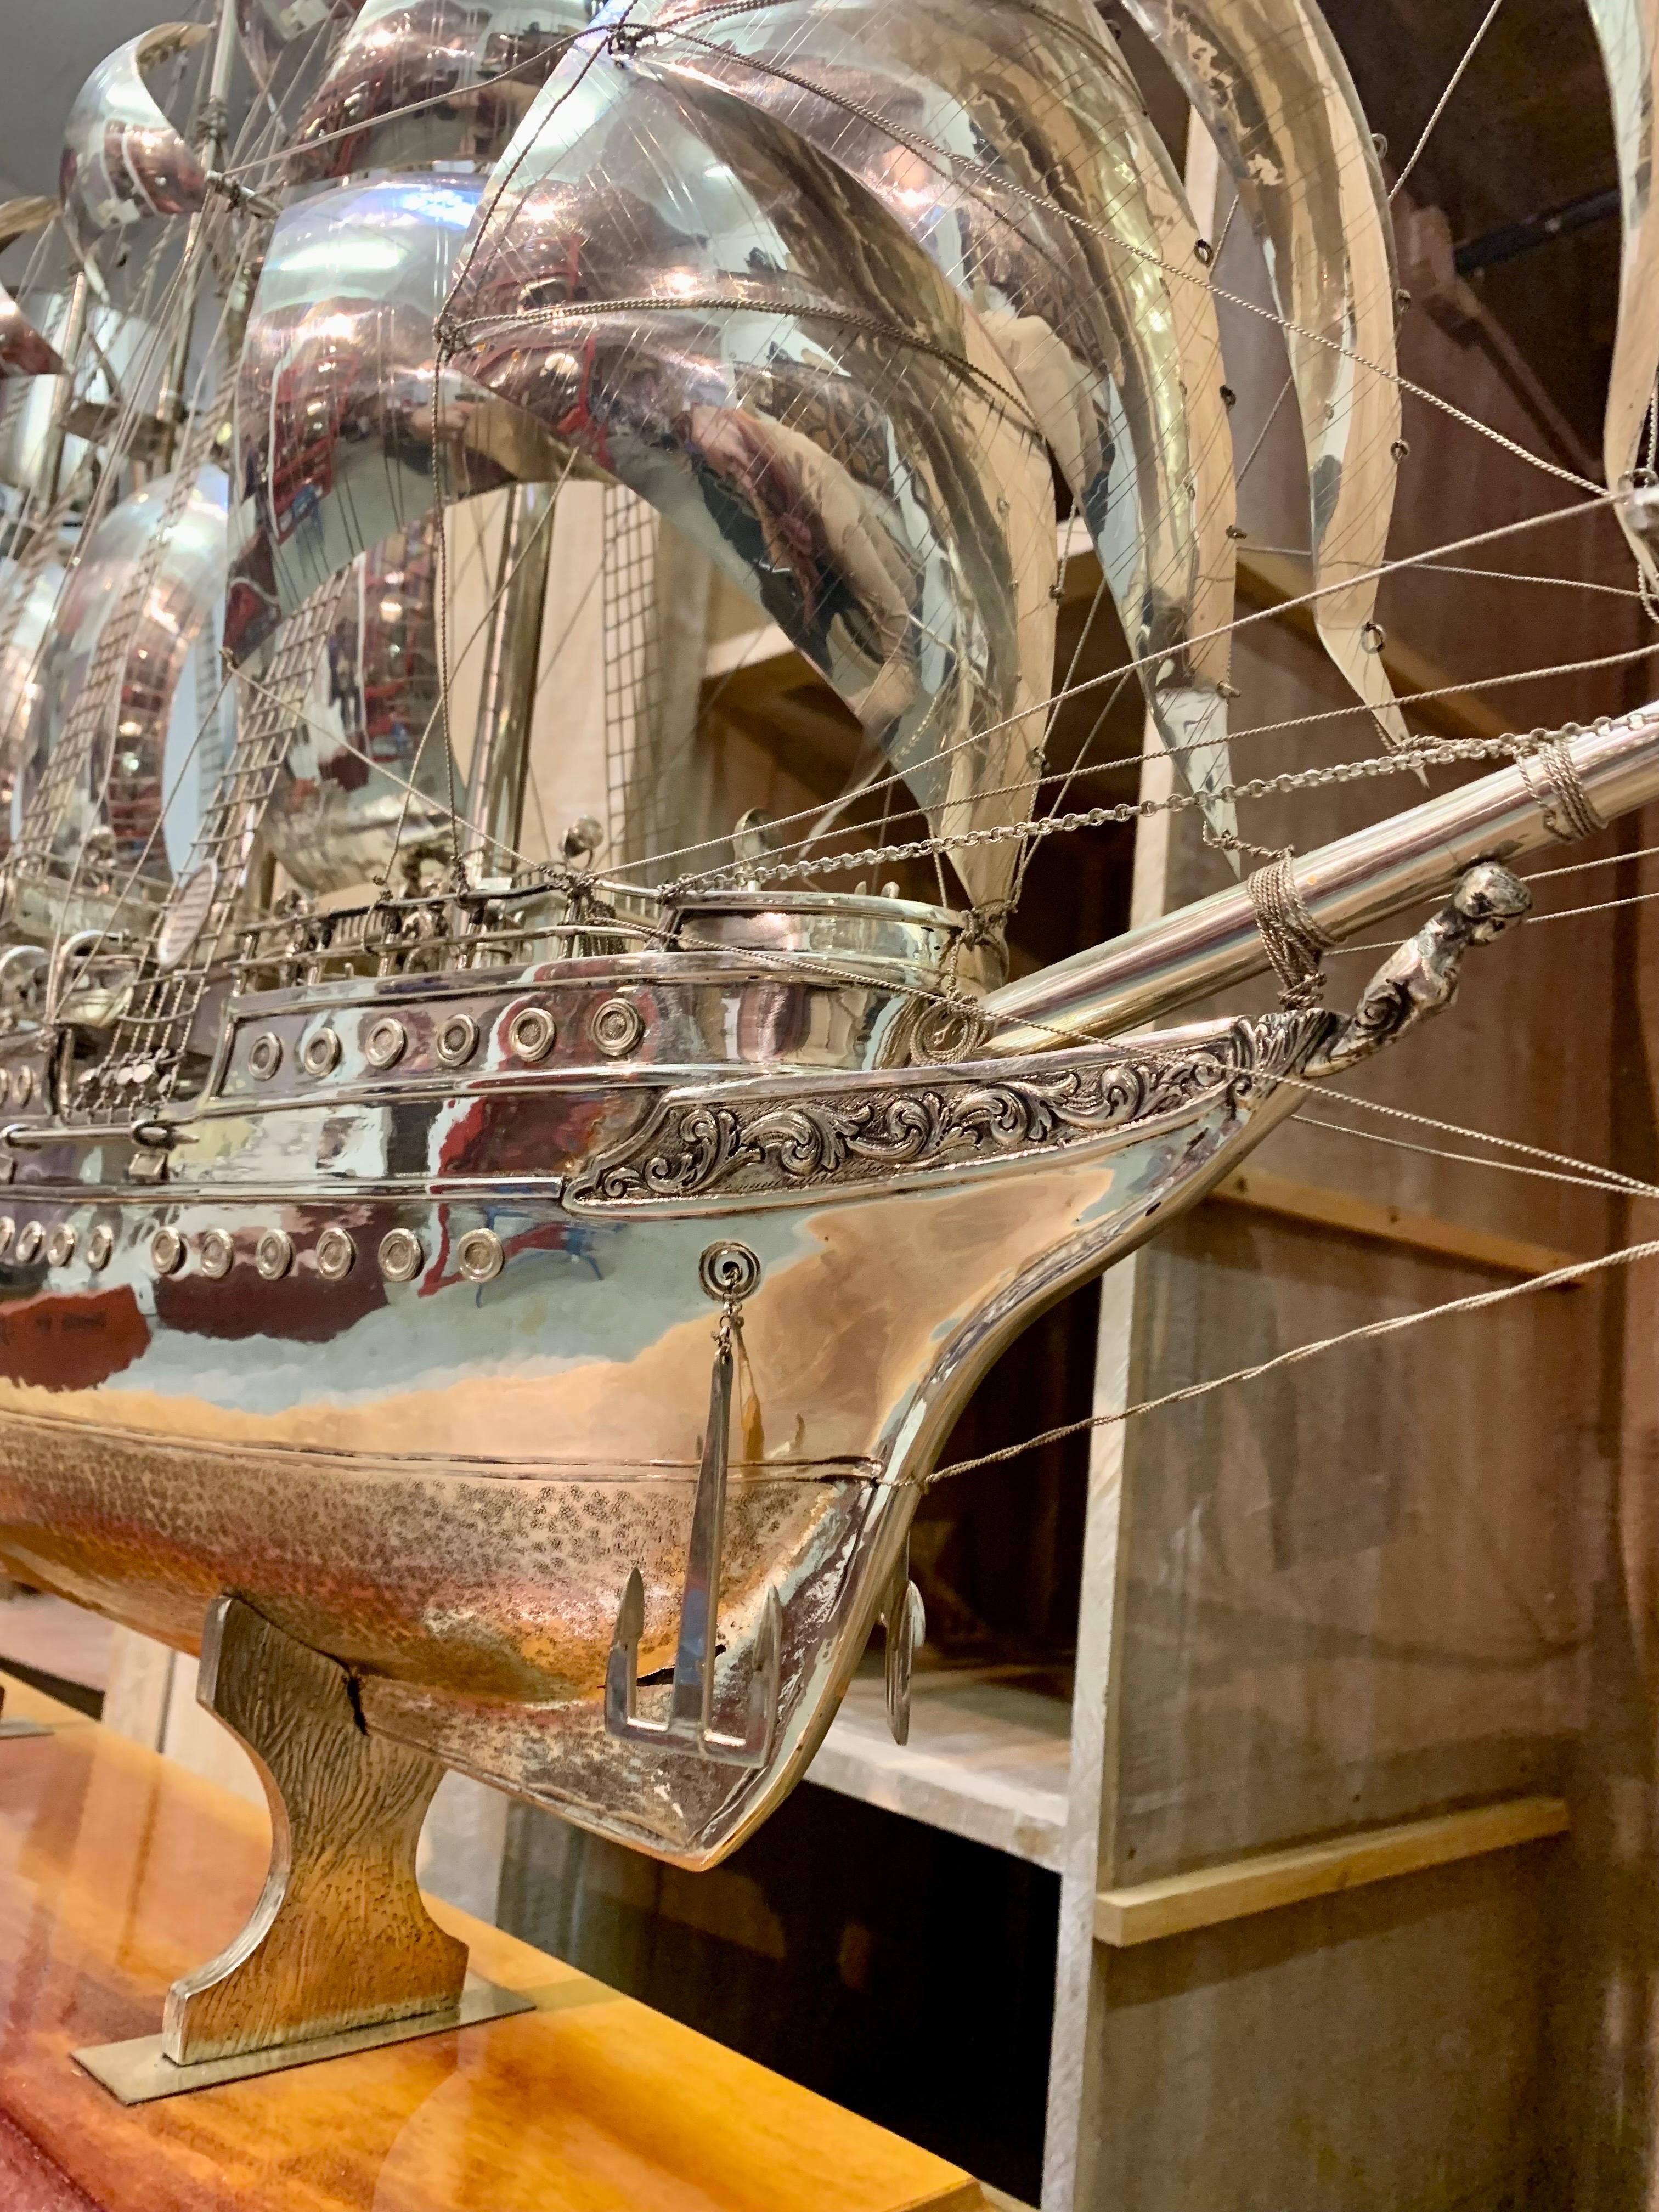 An impressive and large model of a ship in silver, made in Spain in the Mid-1960s, the ship model represents the Spanish navy training ship, Juan Sebastian Elcano, which continues to ply the oceans of the world today.
It is made with exceptional